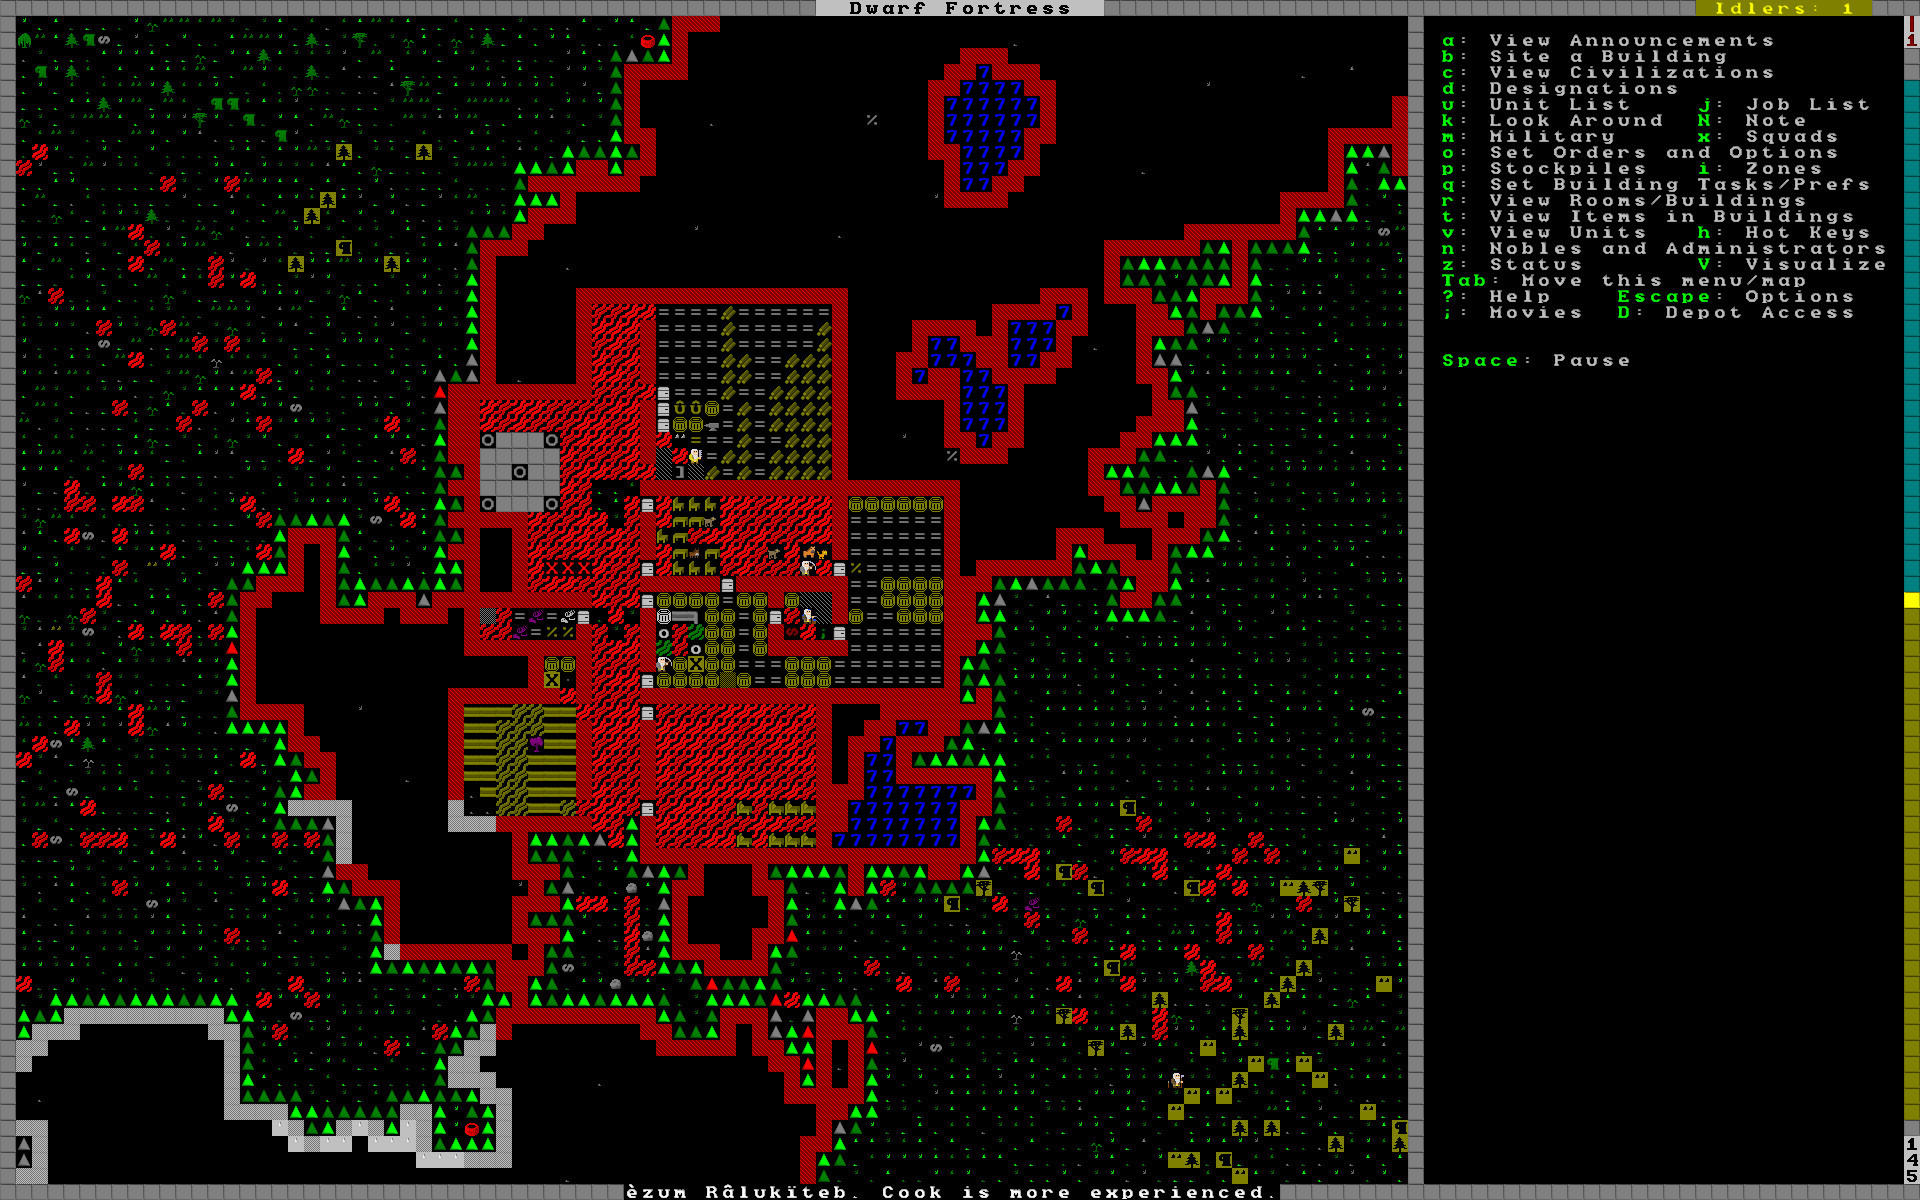 1920x1200 New Version Of Dwarf Fortress Allows For Drinking, Praying, and Library  Building - Niche Gamer